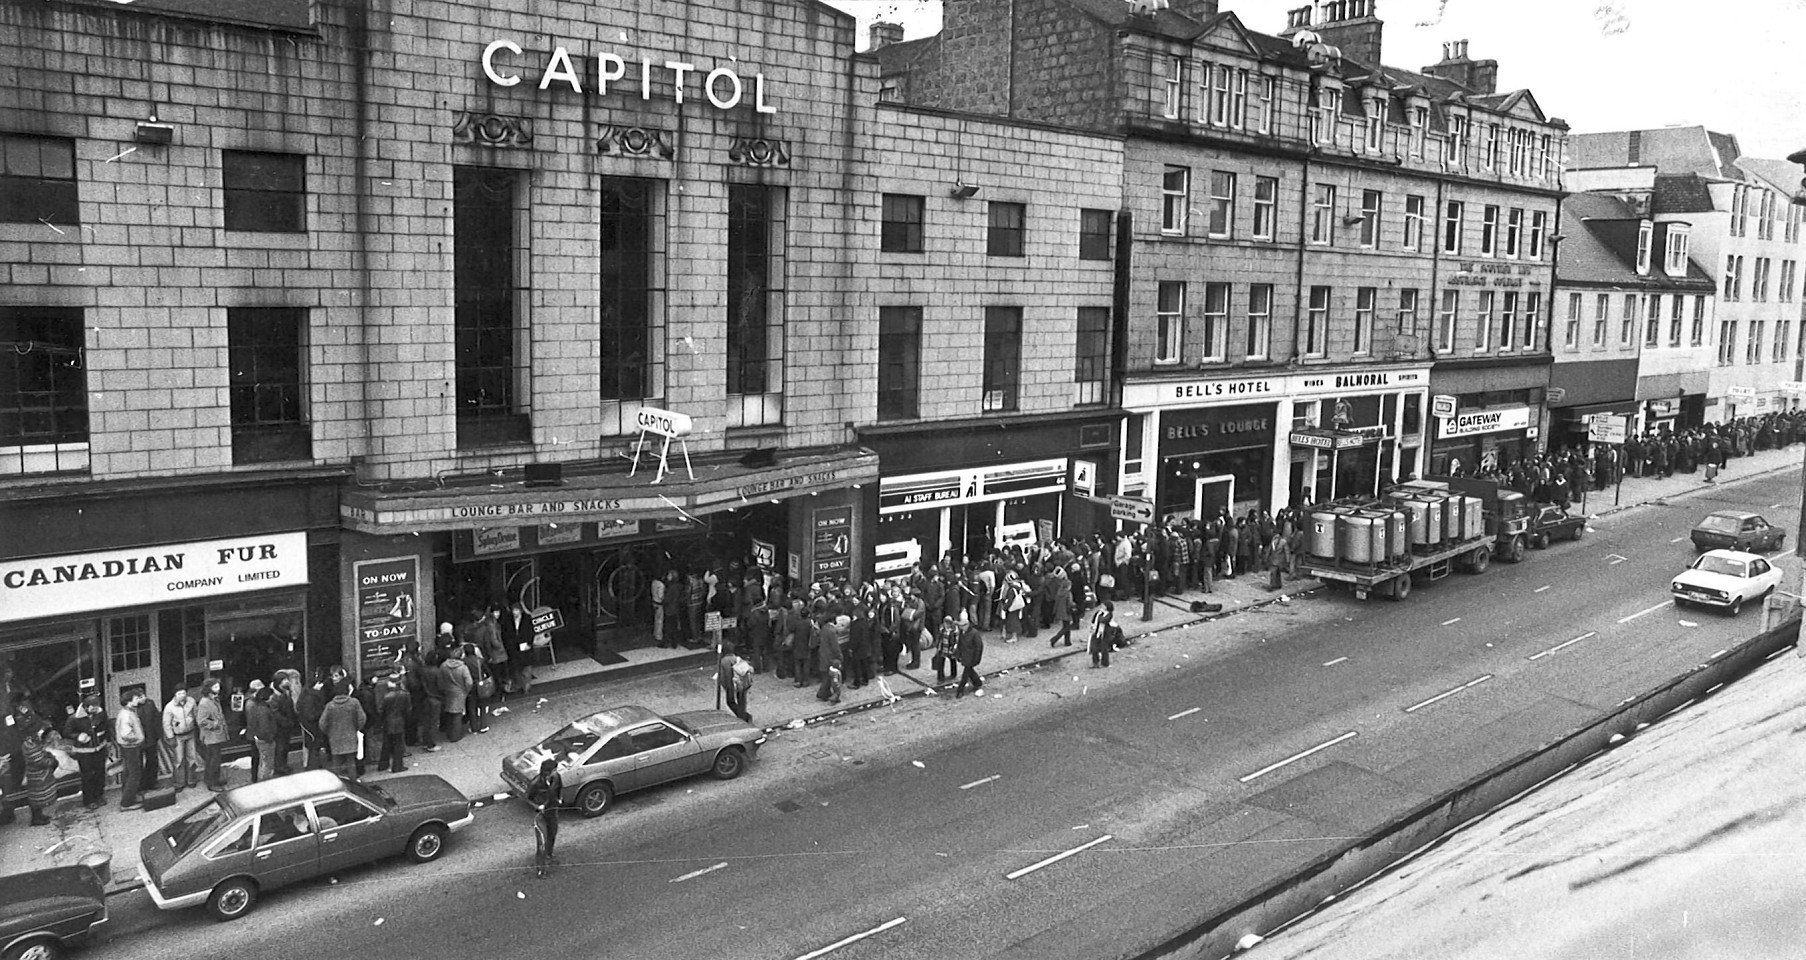 The Capitol Theatre as it was many years ago